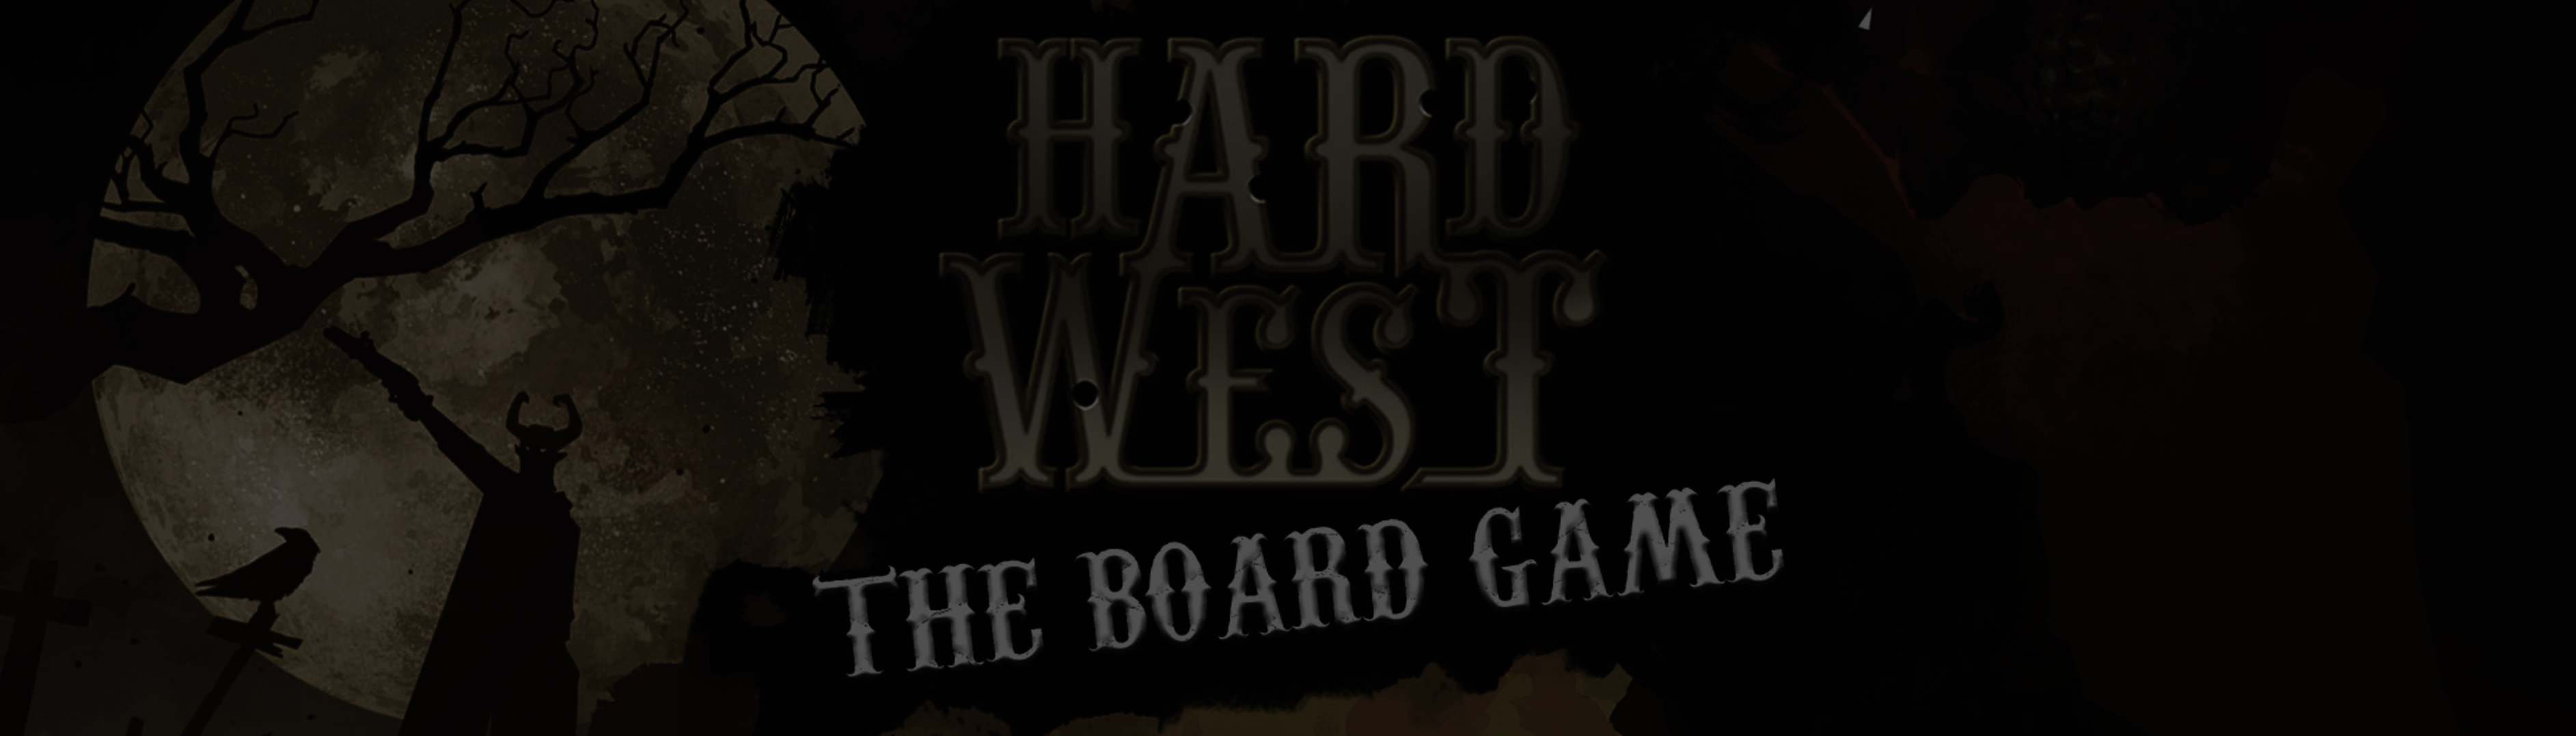 Hard West ⏤ The Board Game by Silver Lynx Games — Kickstarter